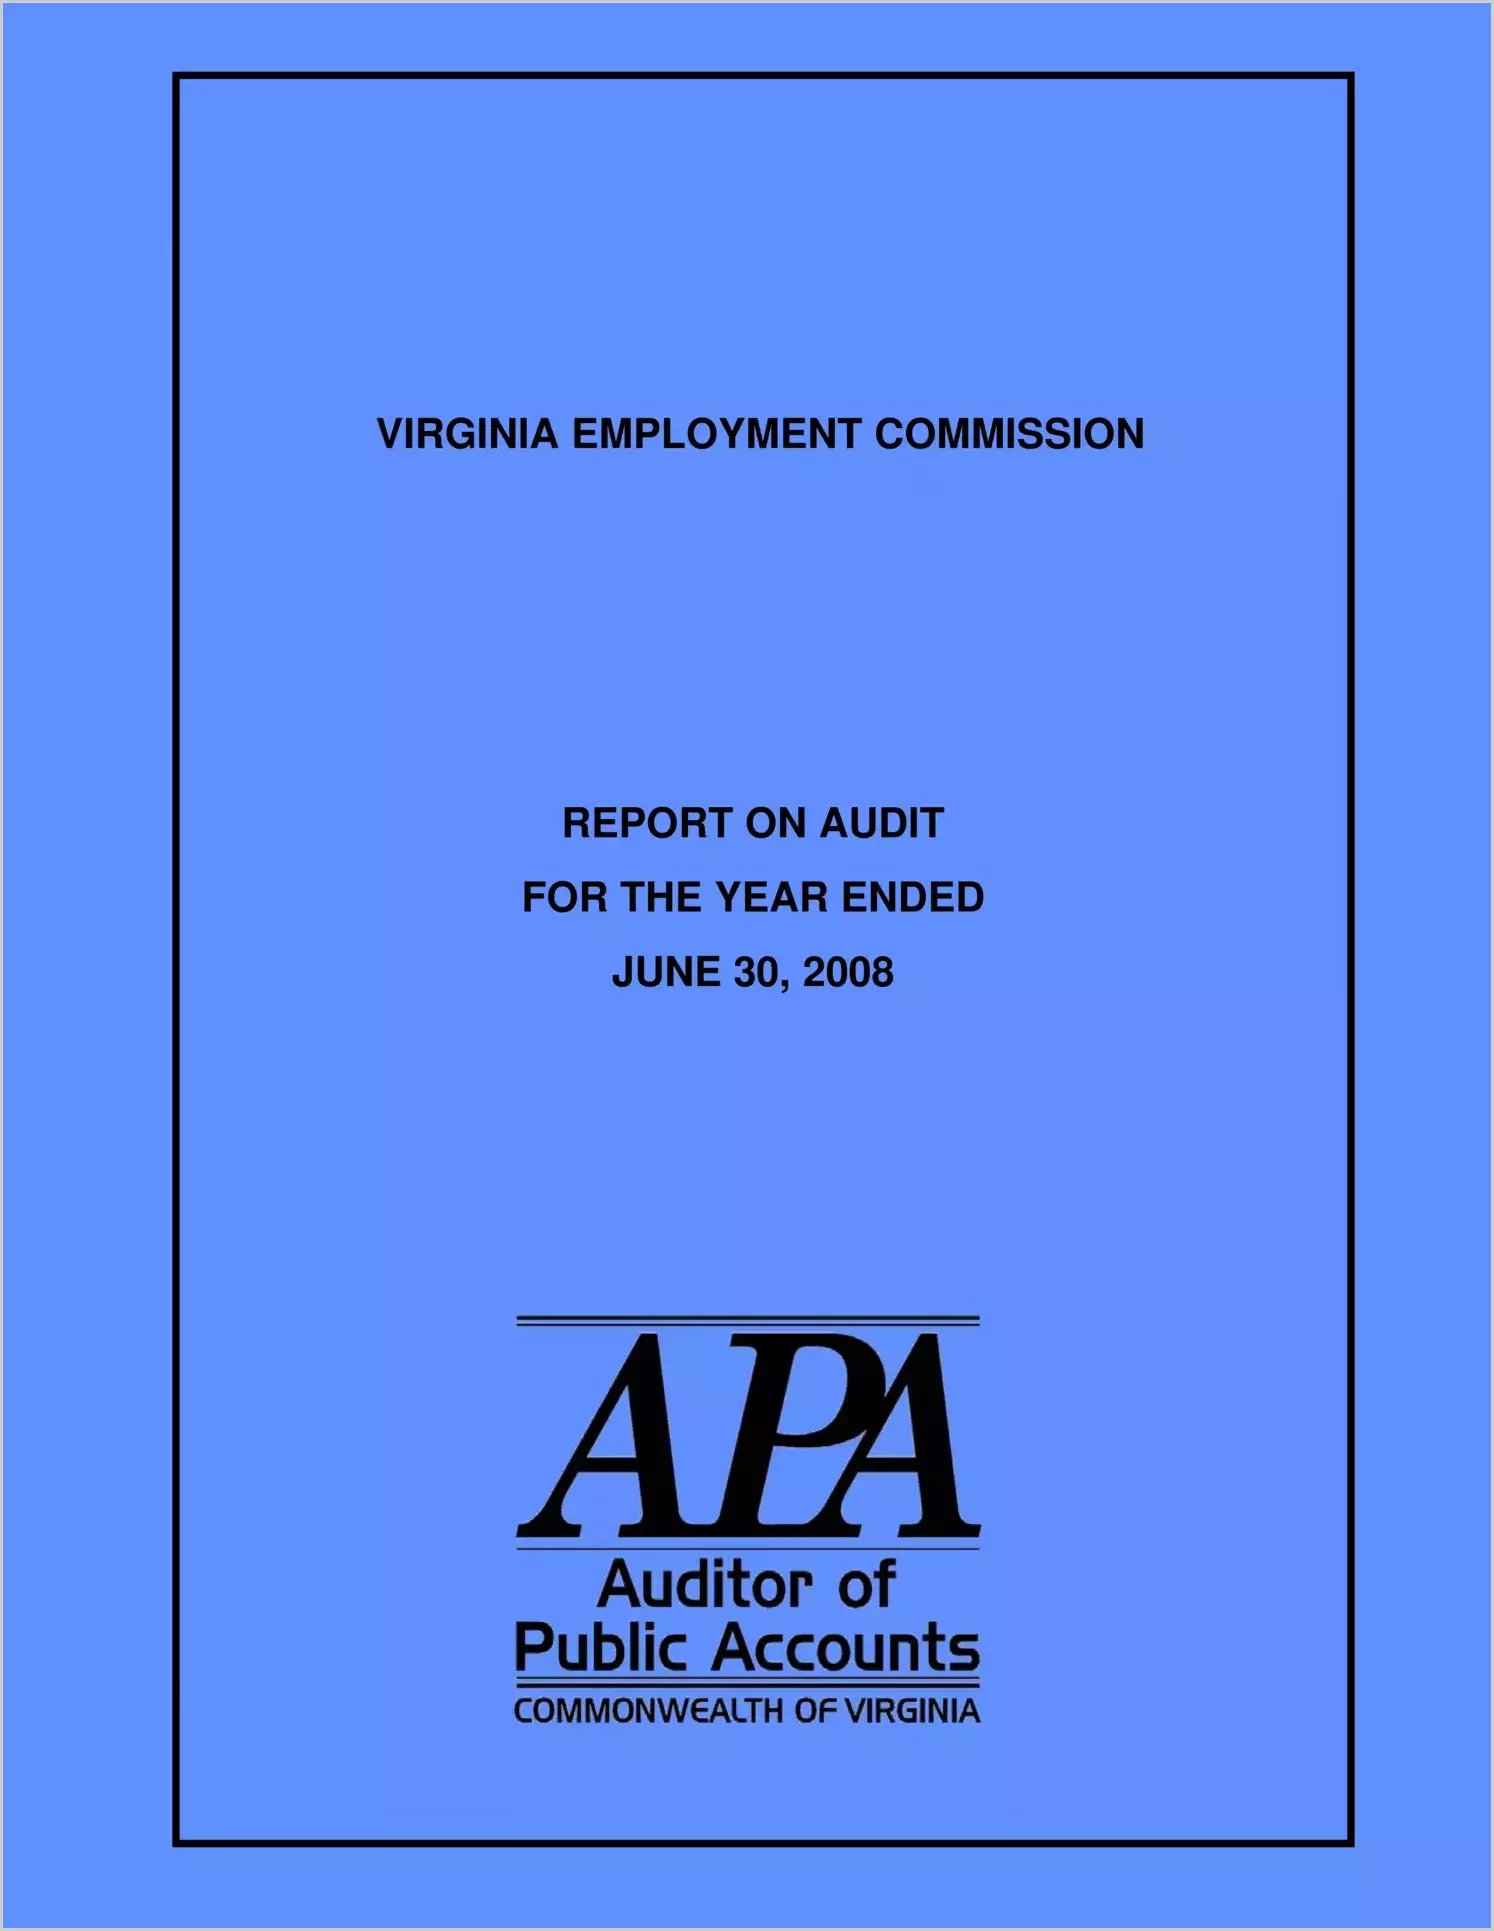 Virginia Employment Commission for the year ended June 30, 2008